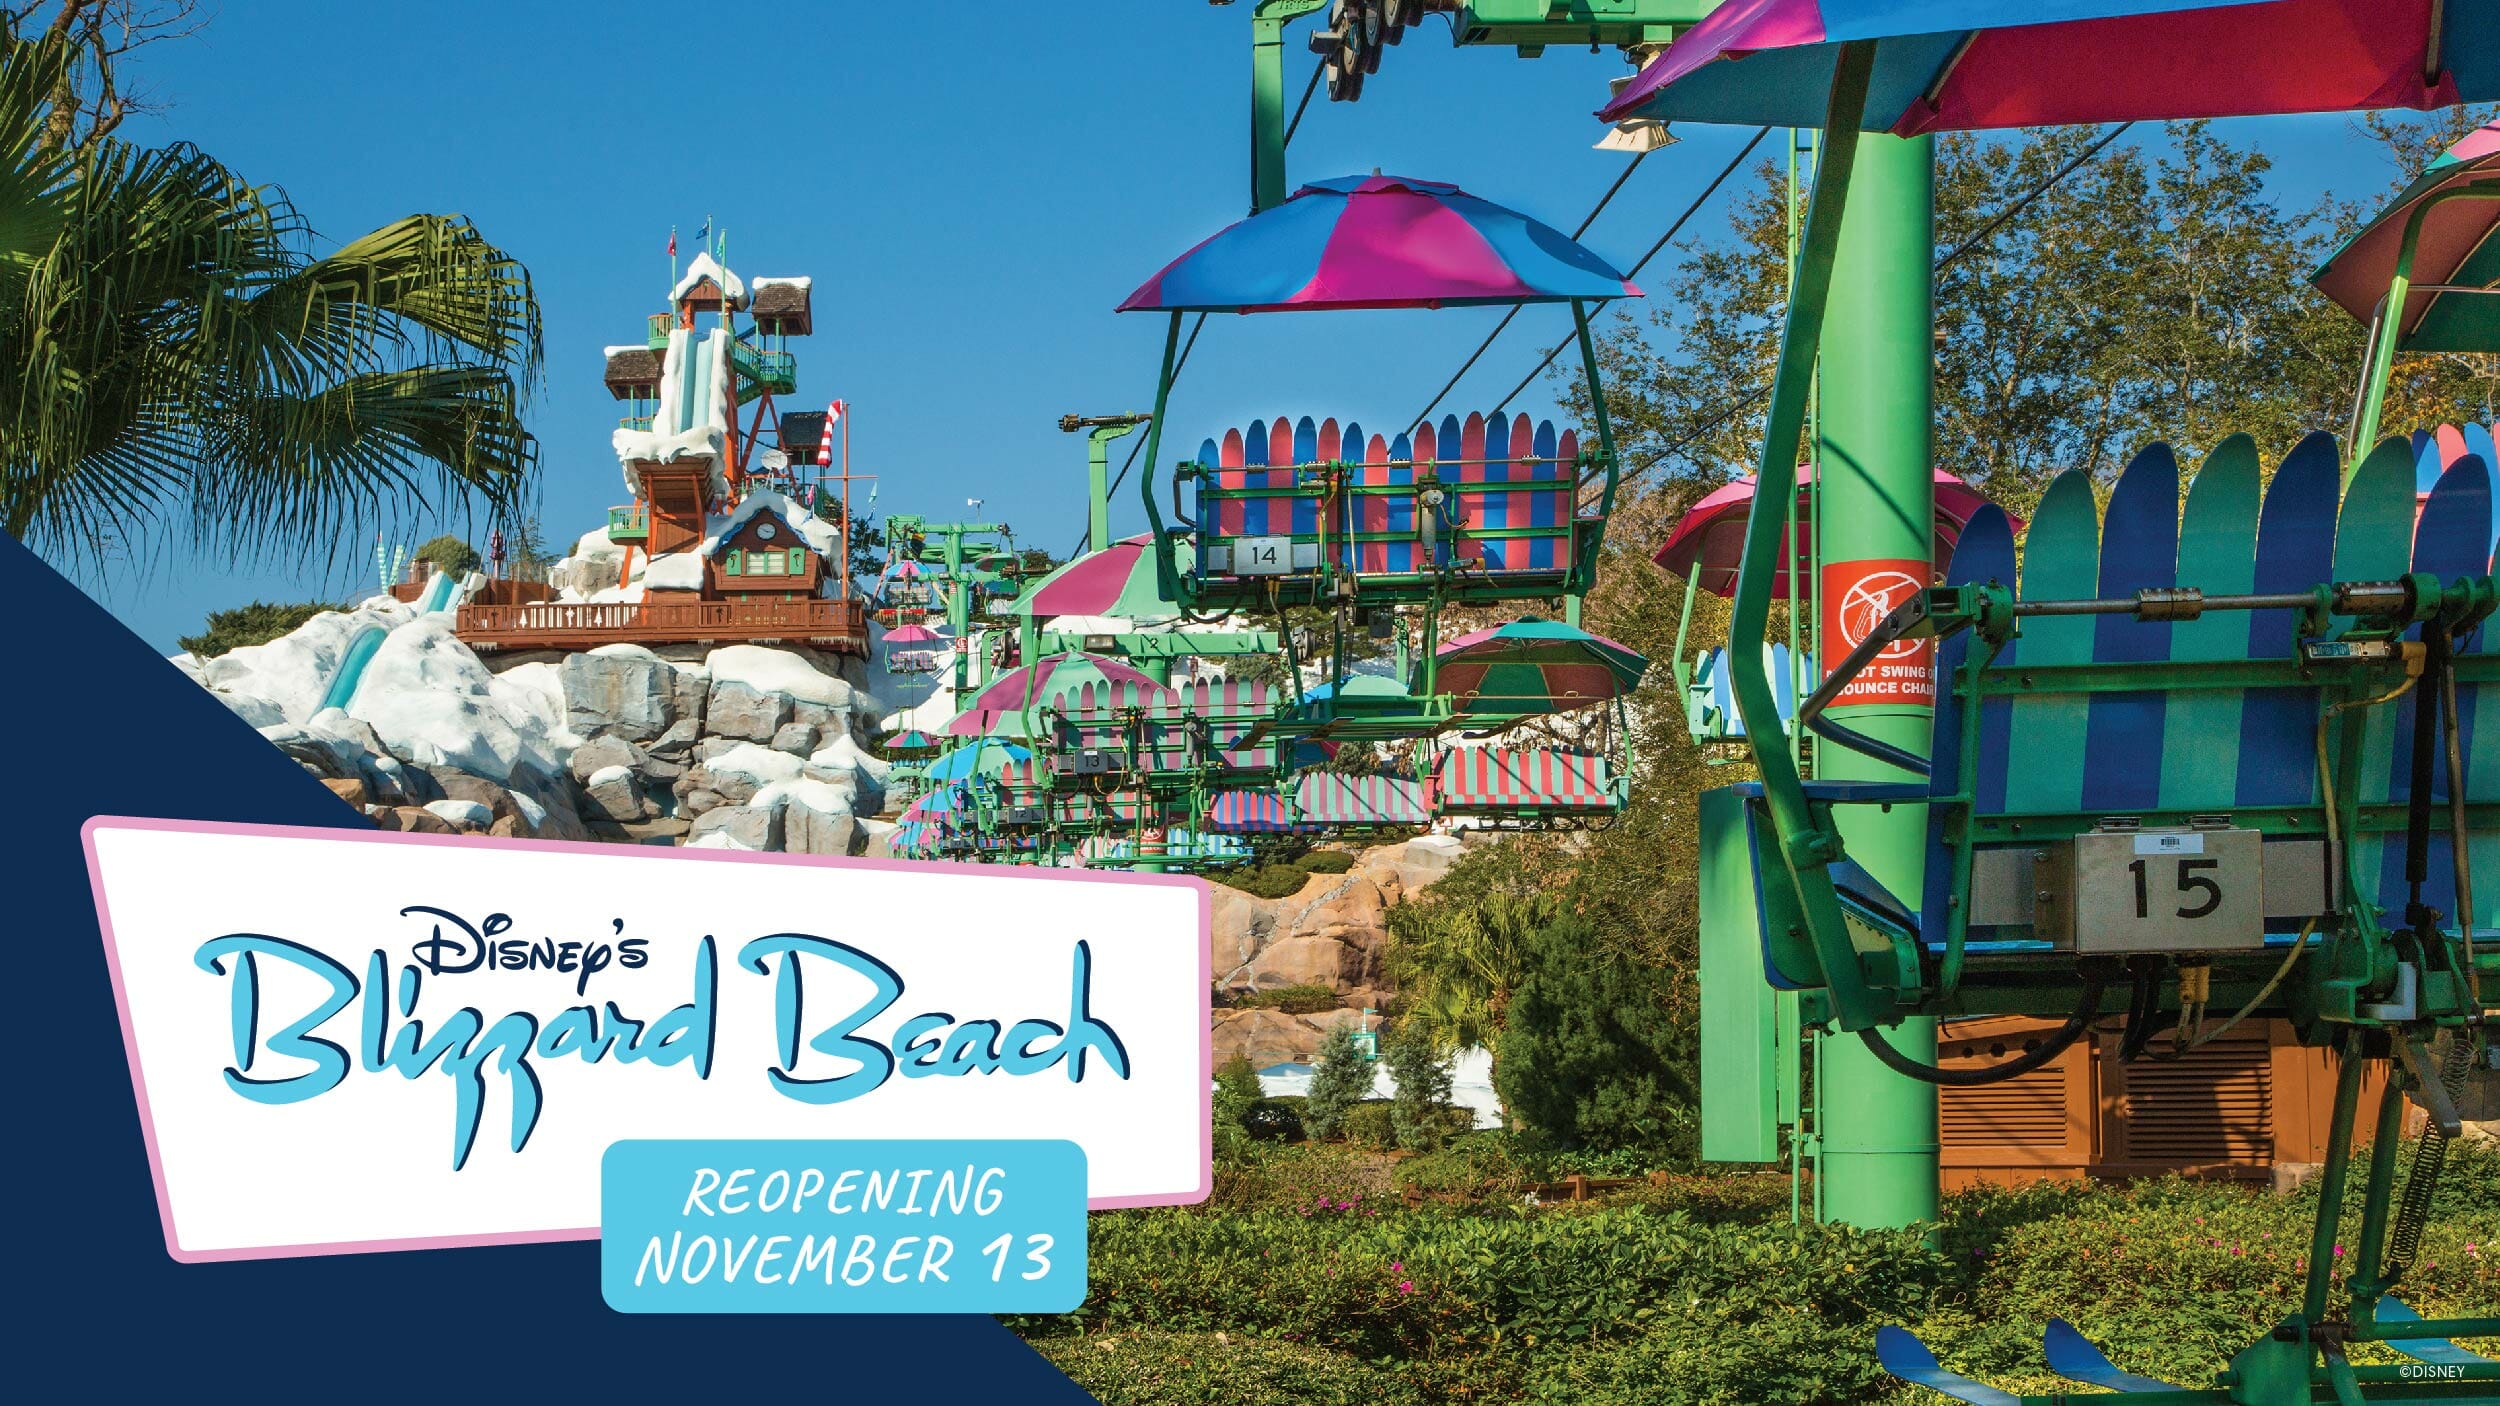 Blizzard Beach Reopening